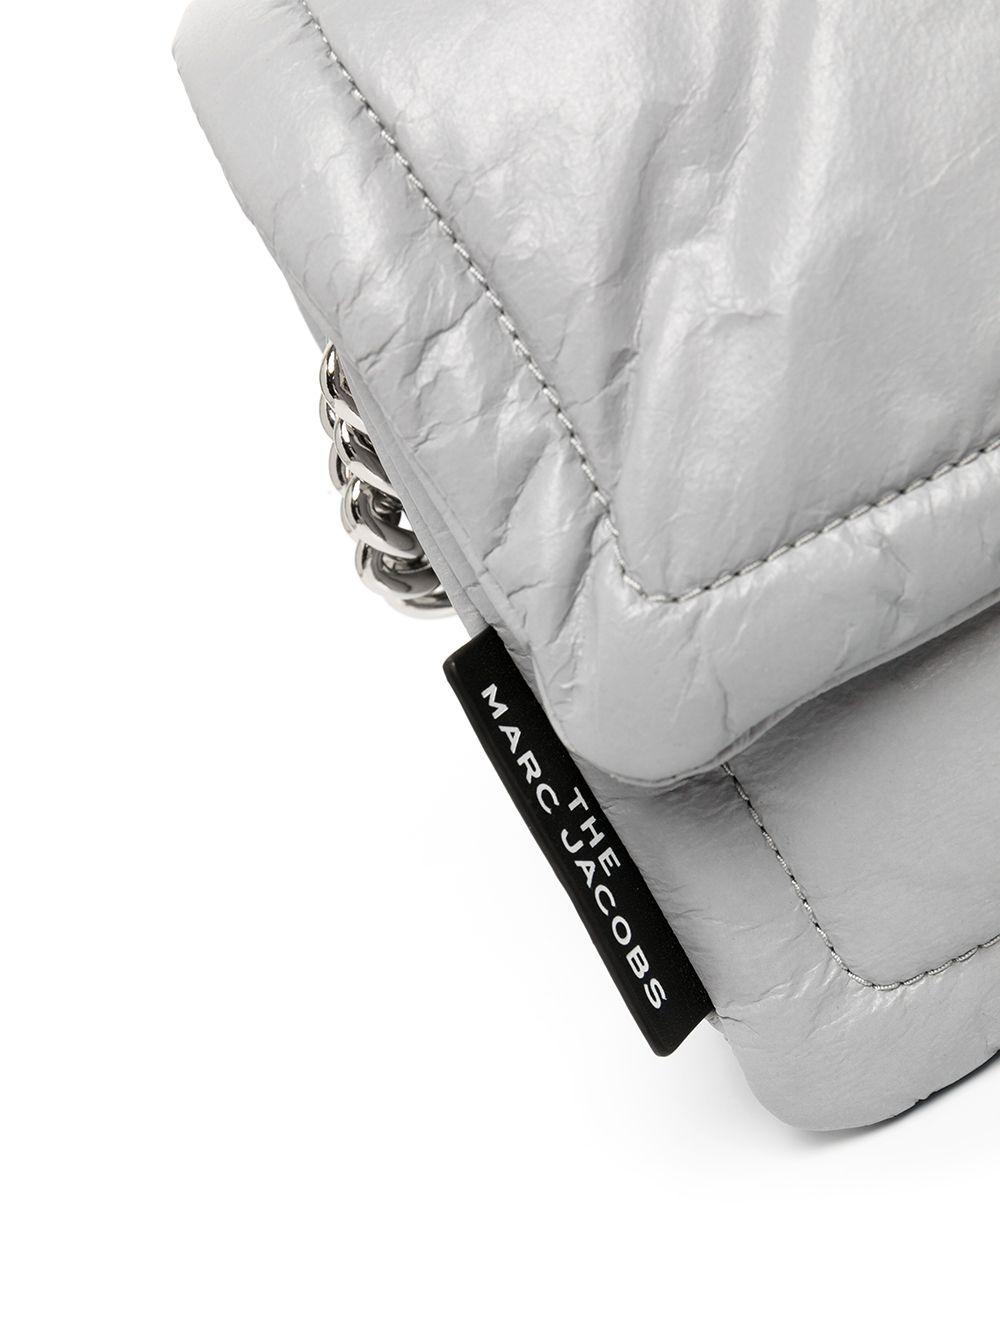 Marc Jacobs The Pillow Shoulder Bag in Gray